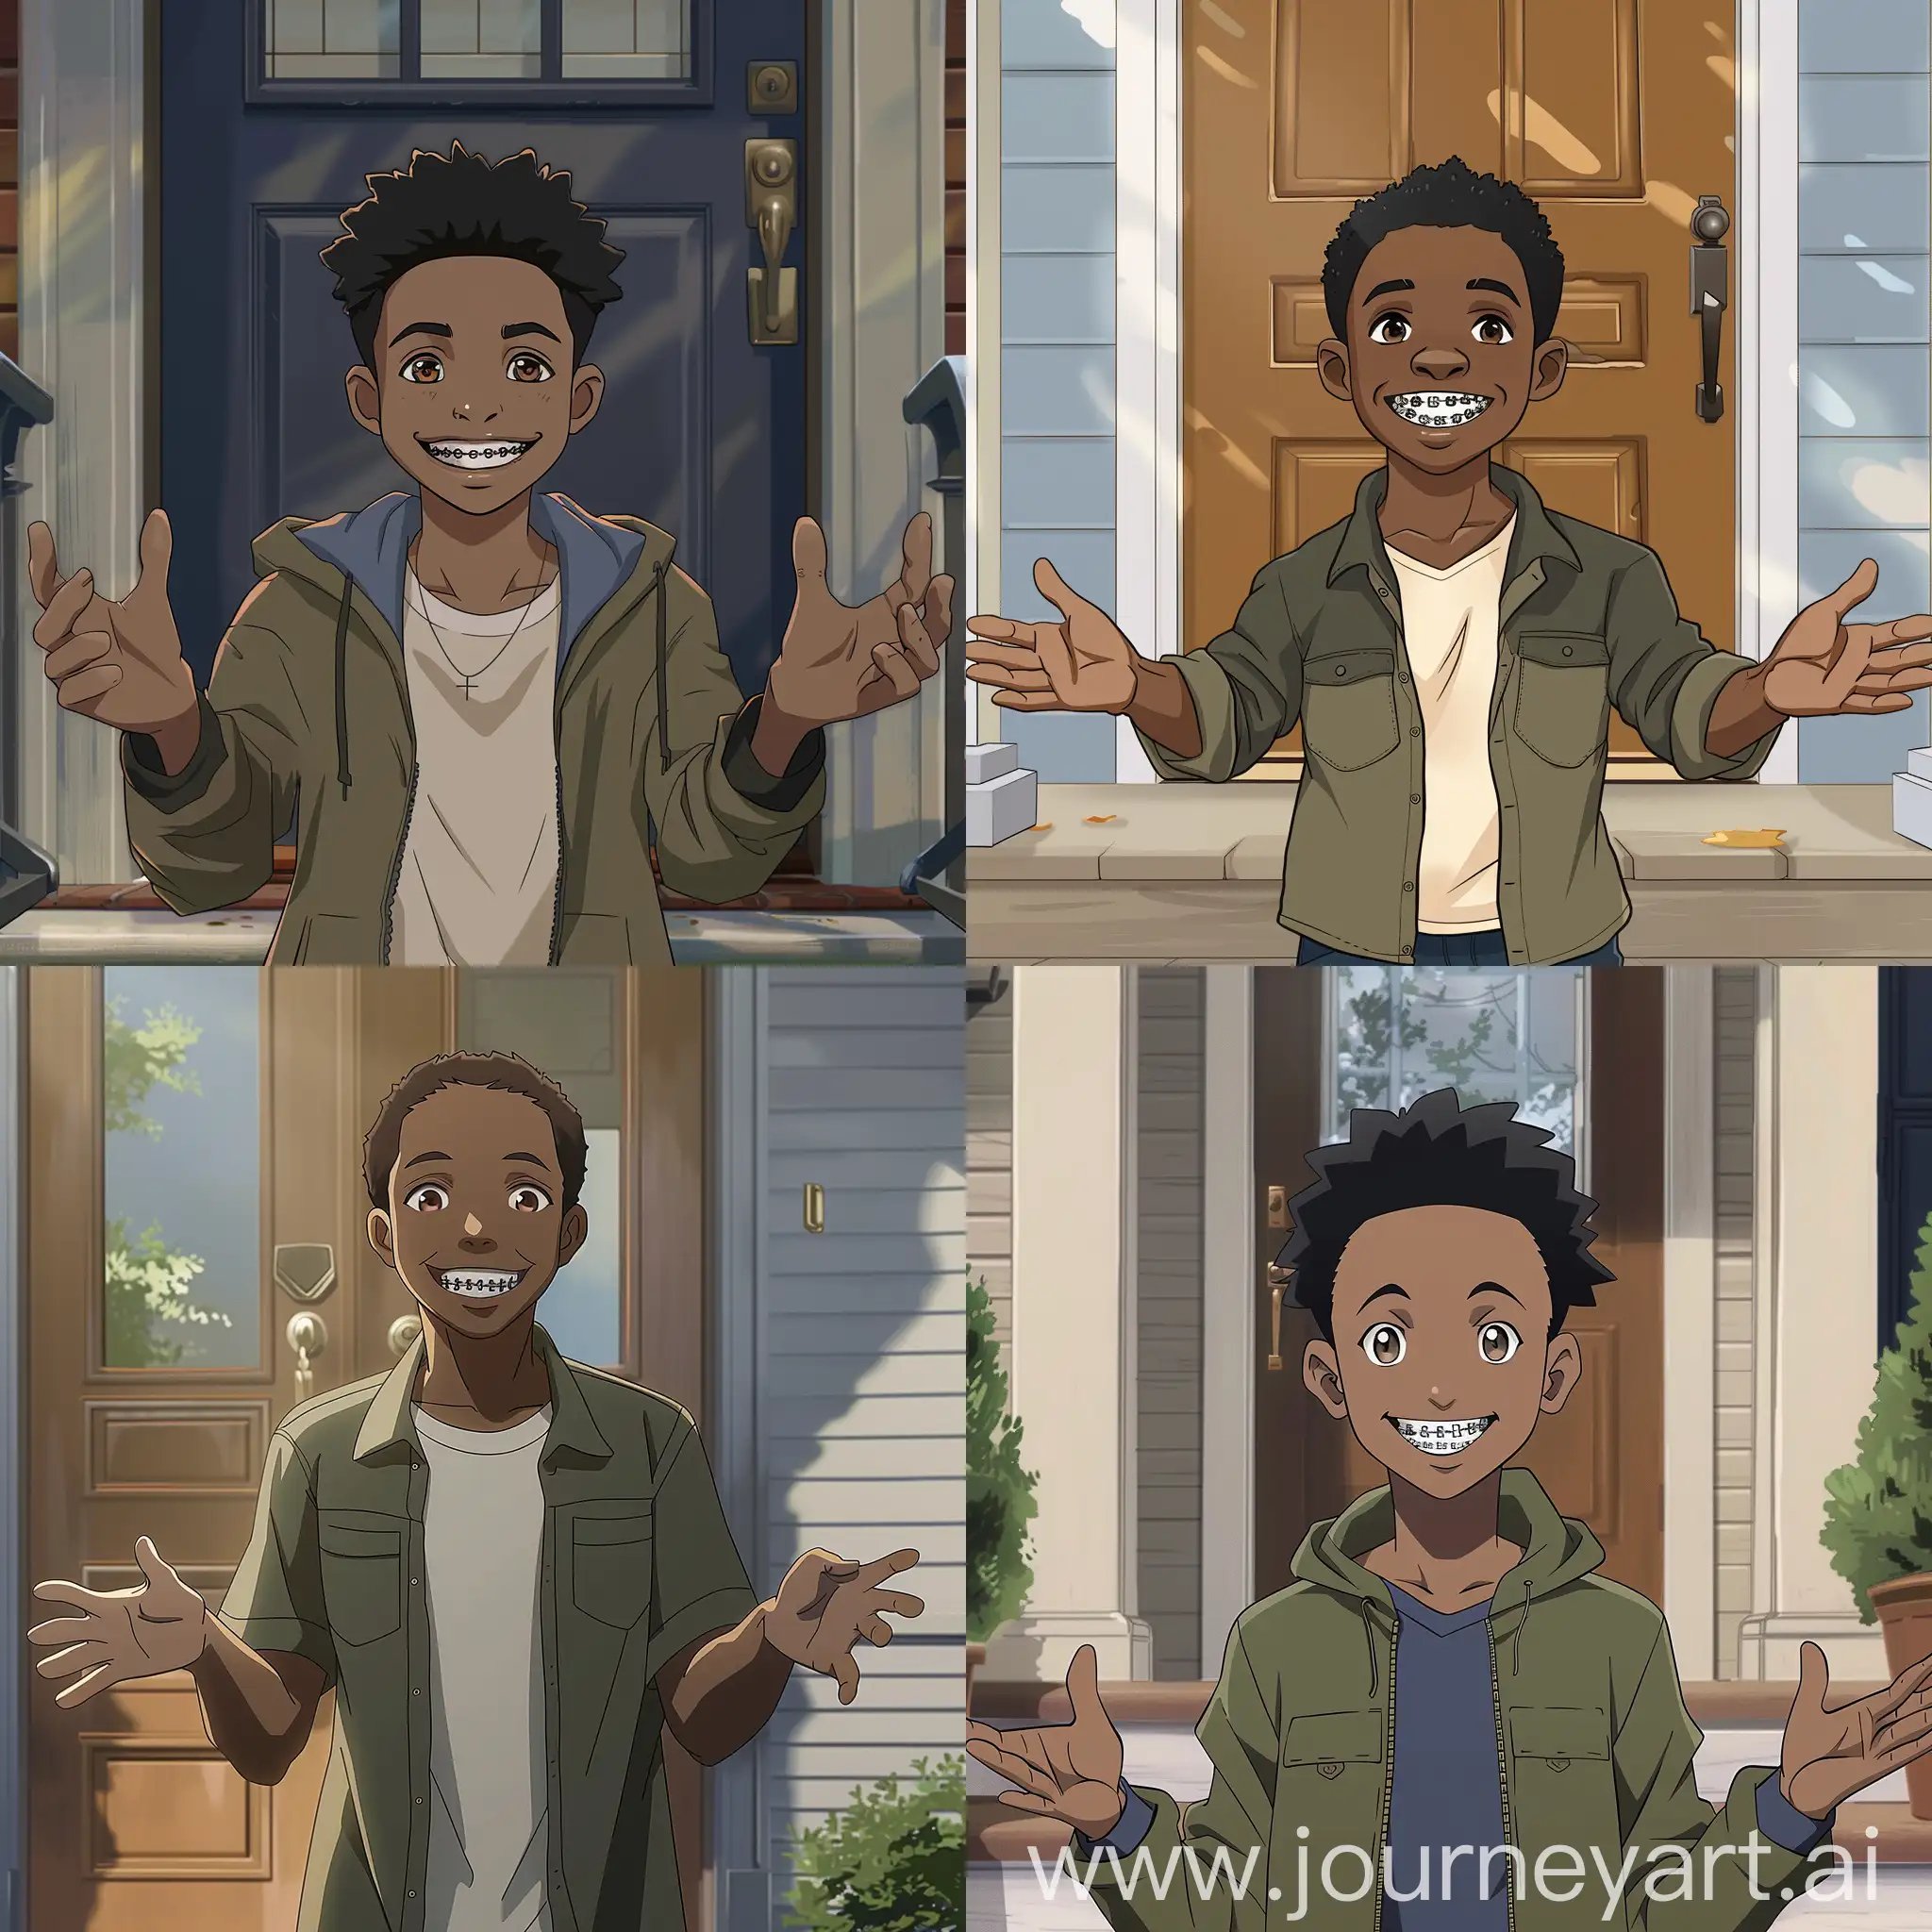 high quality photo of anime African American male holding his hands out at the front door step smiling with braces